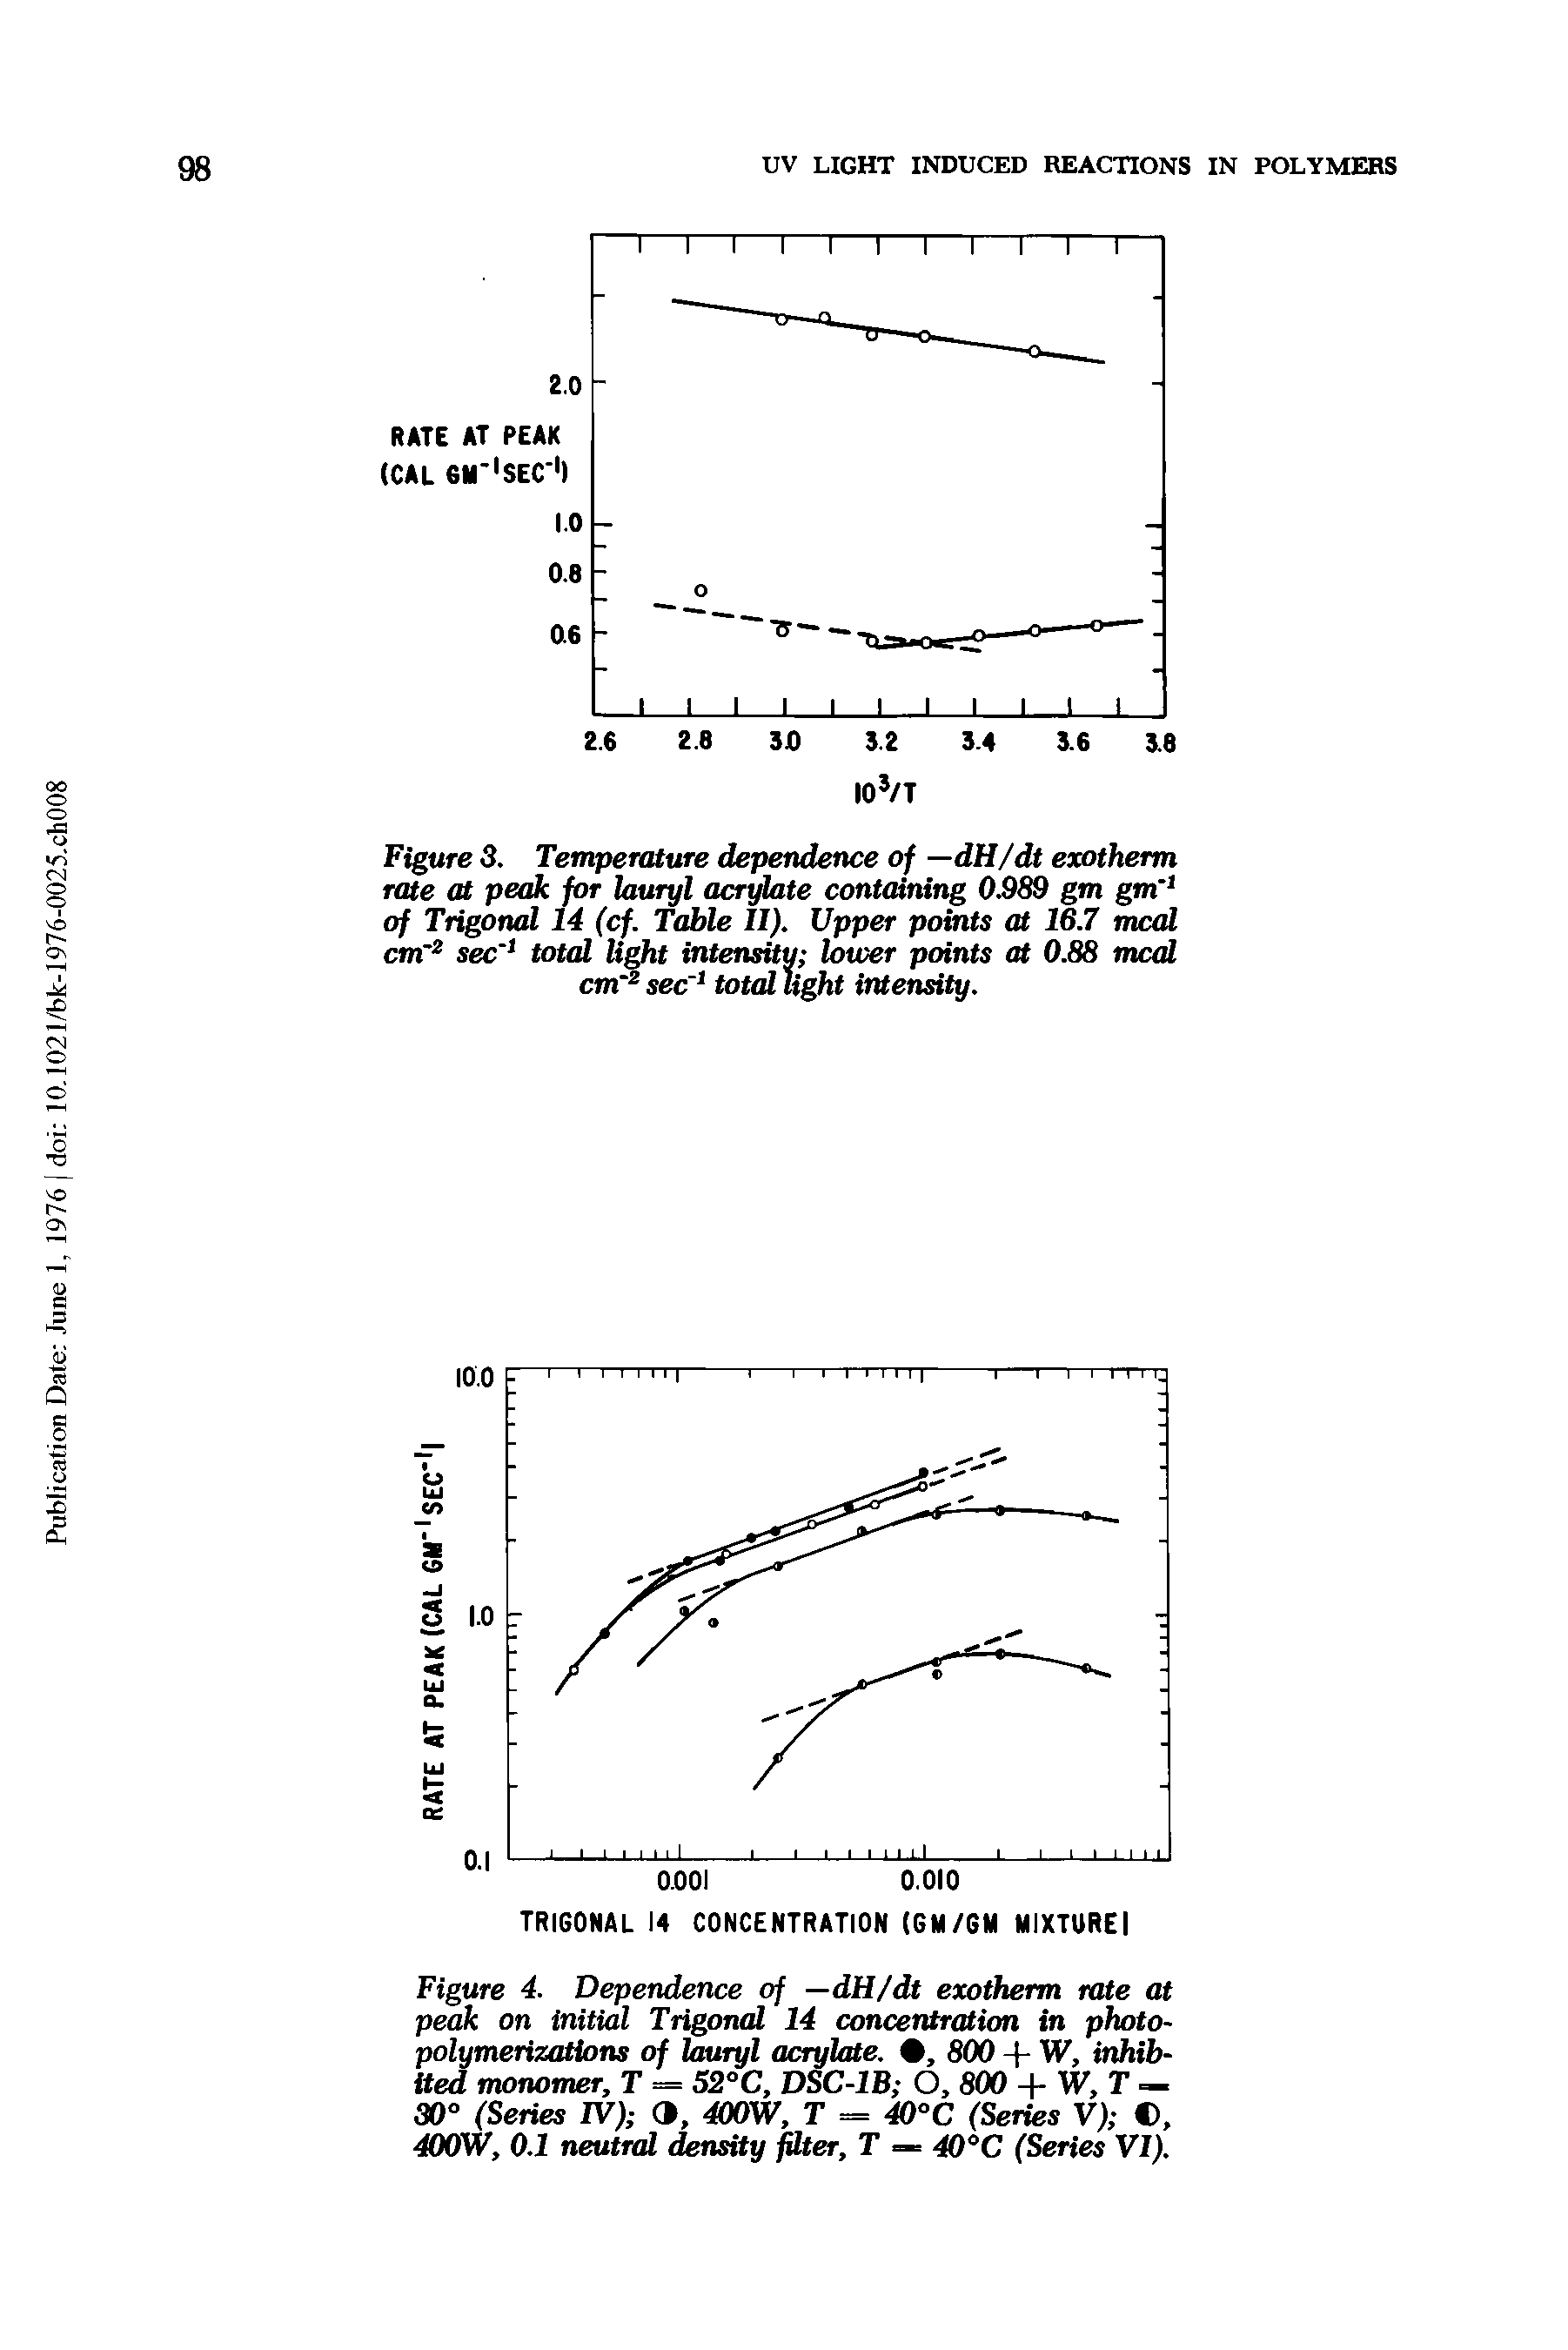 Figure 4. Dependence of —dH/dt exotherm rate at peak on initial Trigonal 14 concentration in photopolymerizations of lauryl acrylate. , 800 - - W, inhibited monomer, T = 52°C, DSC-IB O, 800 - -W,T — 30° (Series TV) 40aW. T = 40°C (Series V) C, 400W, 0.1 neutral density filter, T — 40°C ("Scries VI).